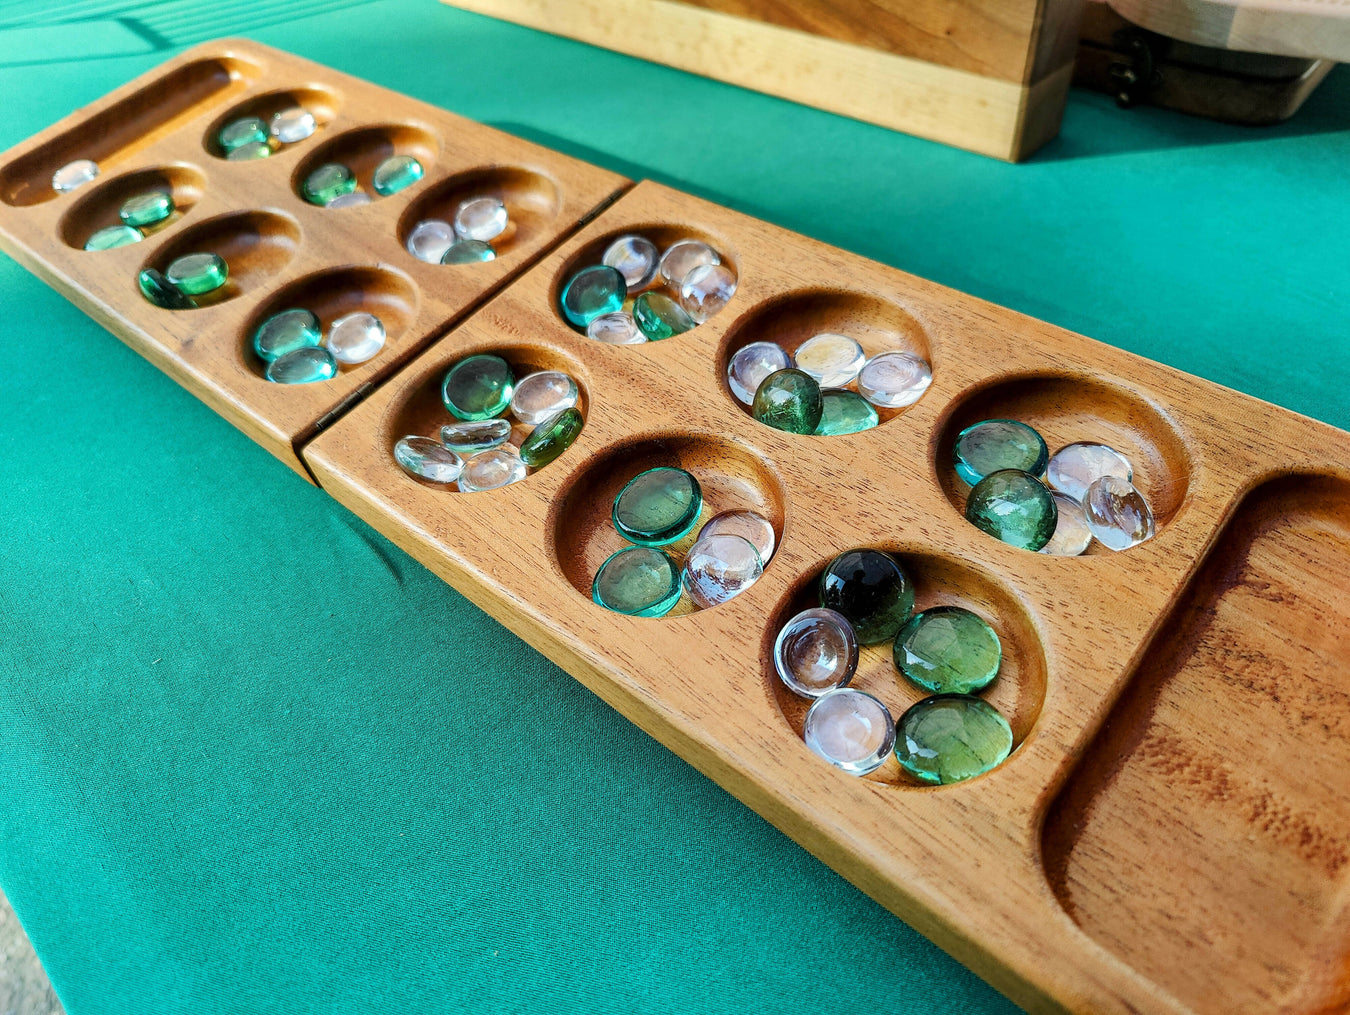 Handmade Wood Mancala Board on a Green Tablecloth with Green and White Glass Stones